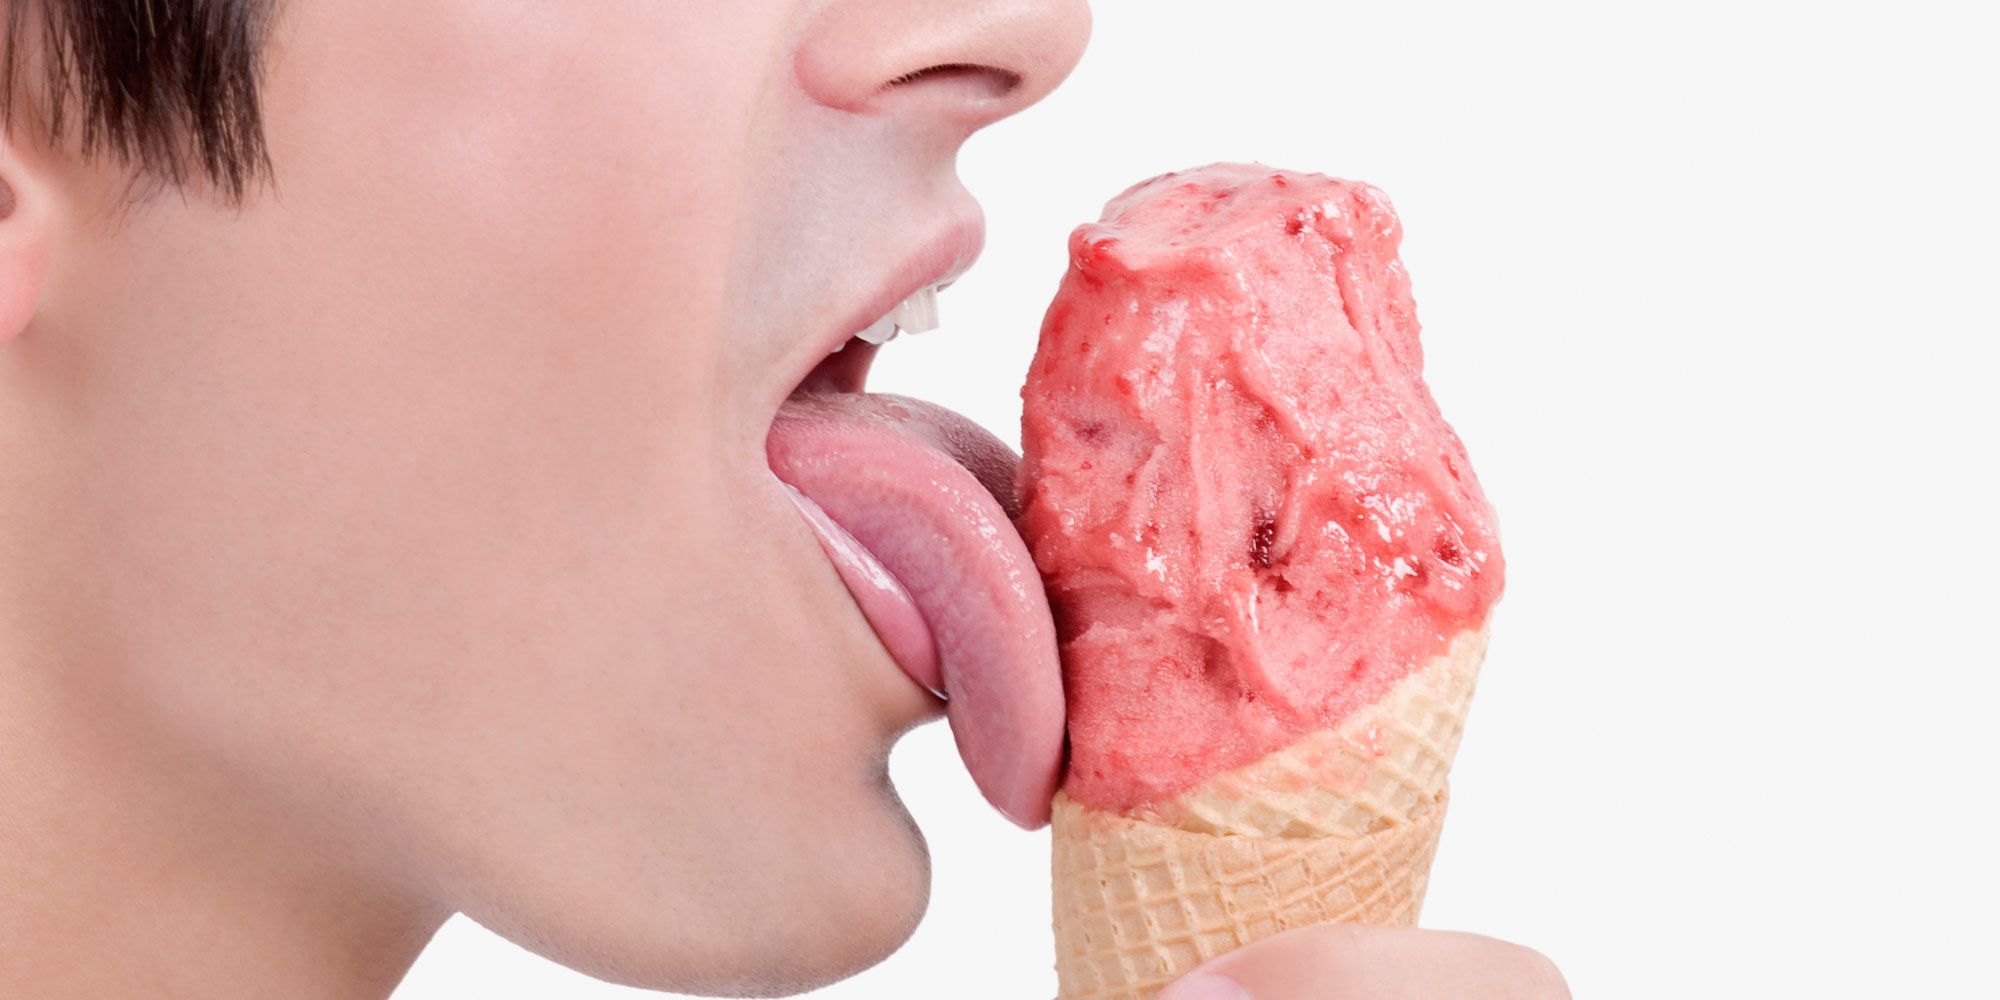 12 Things Women Wish Guys Knew About Oral